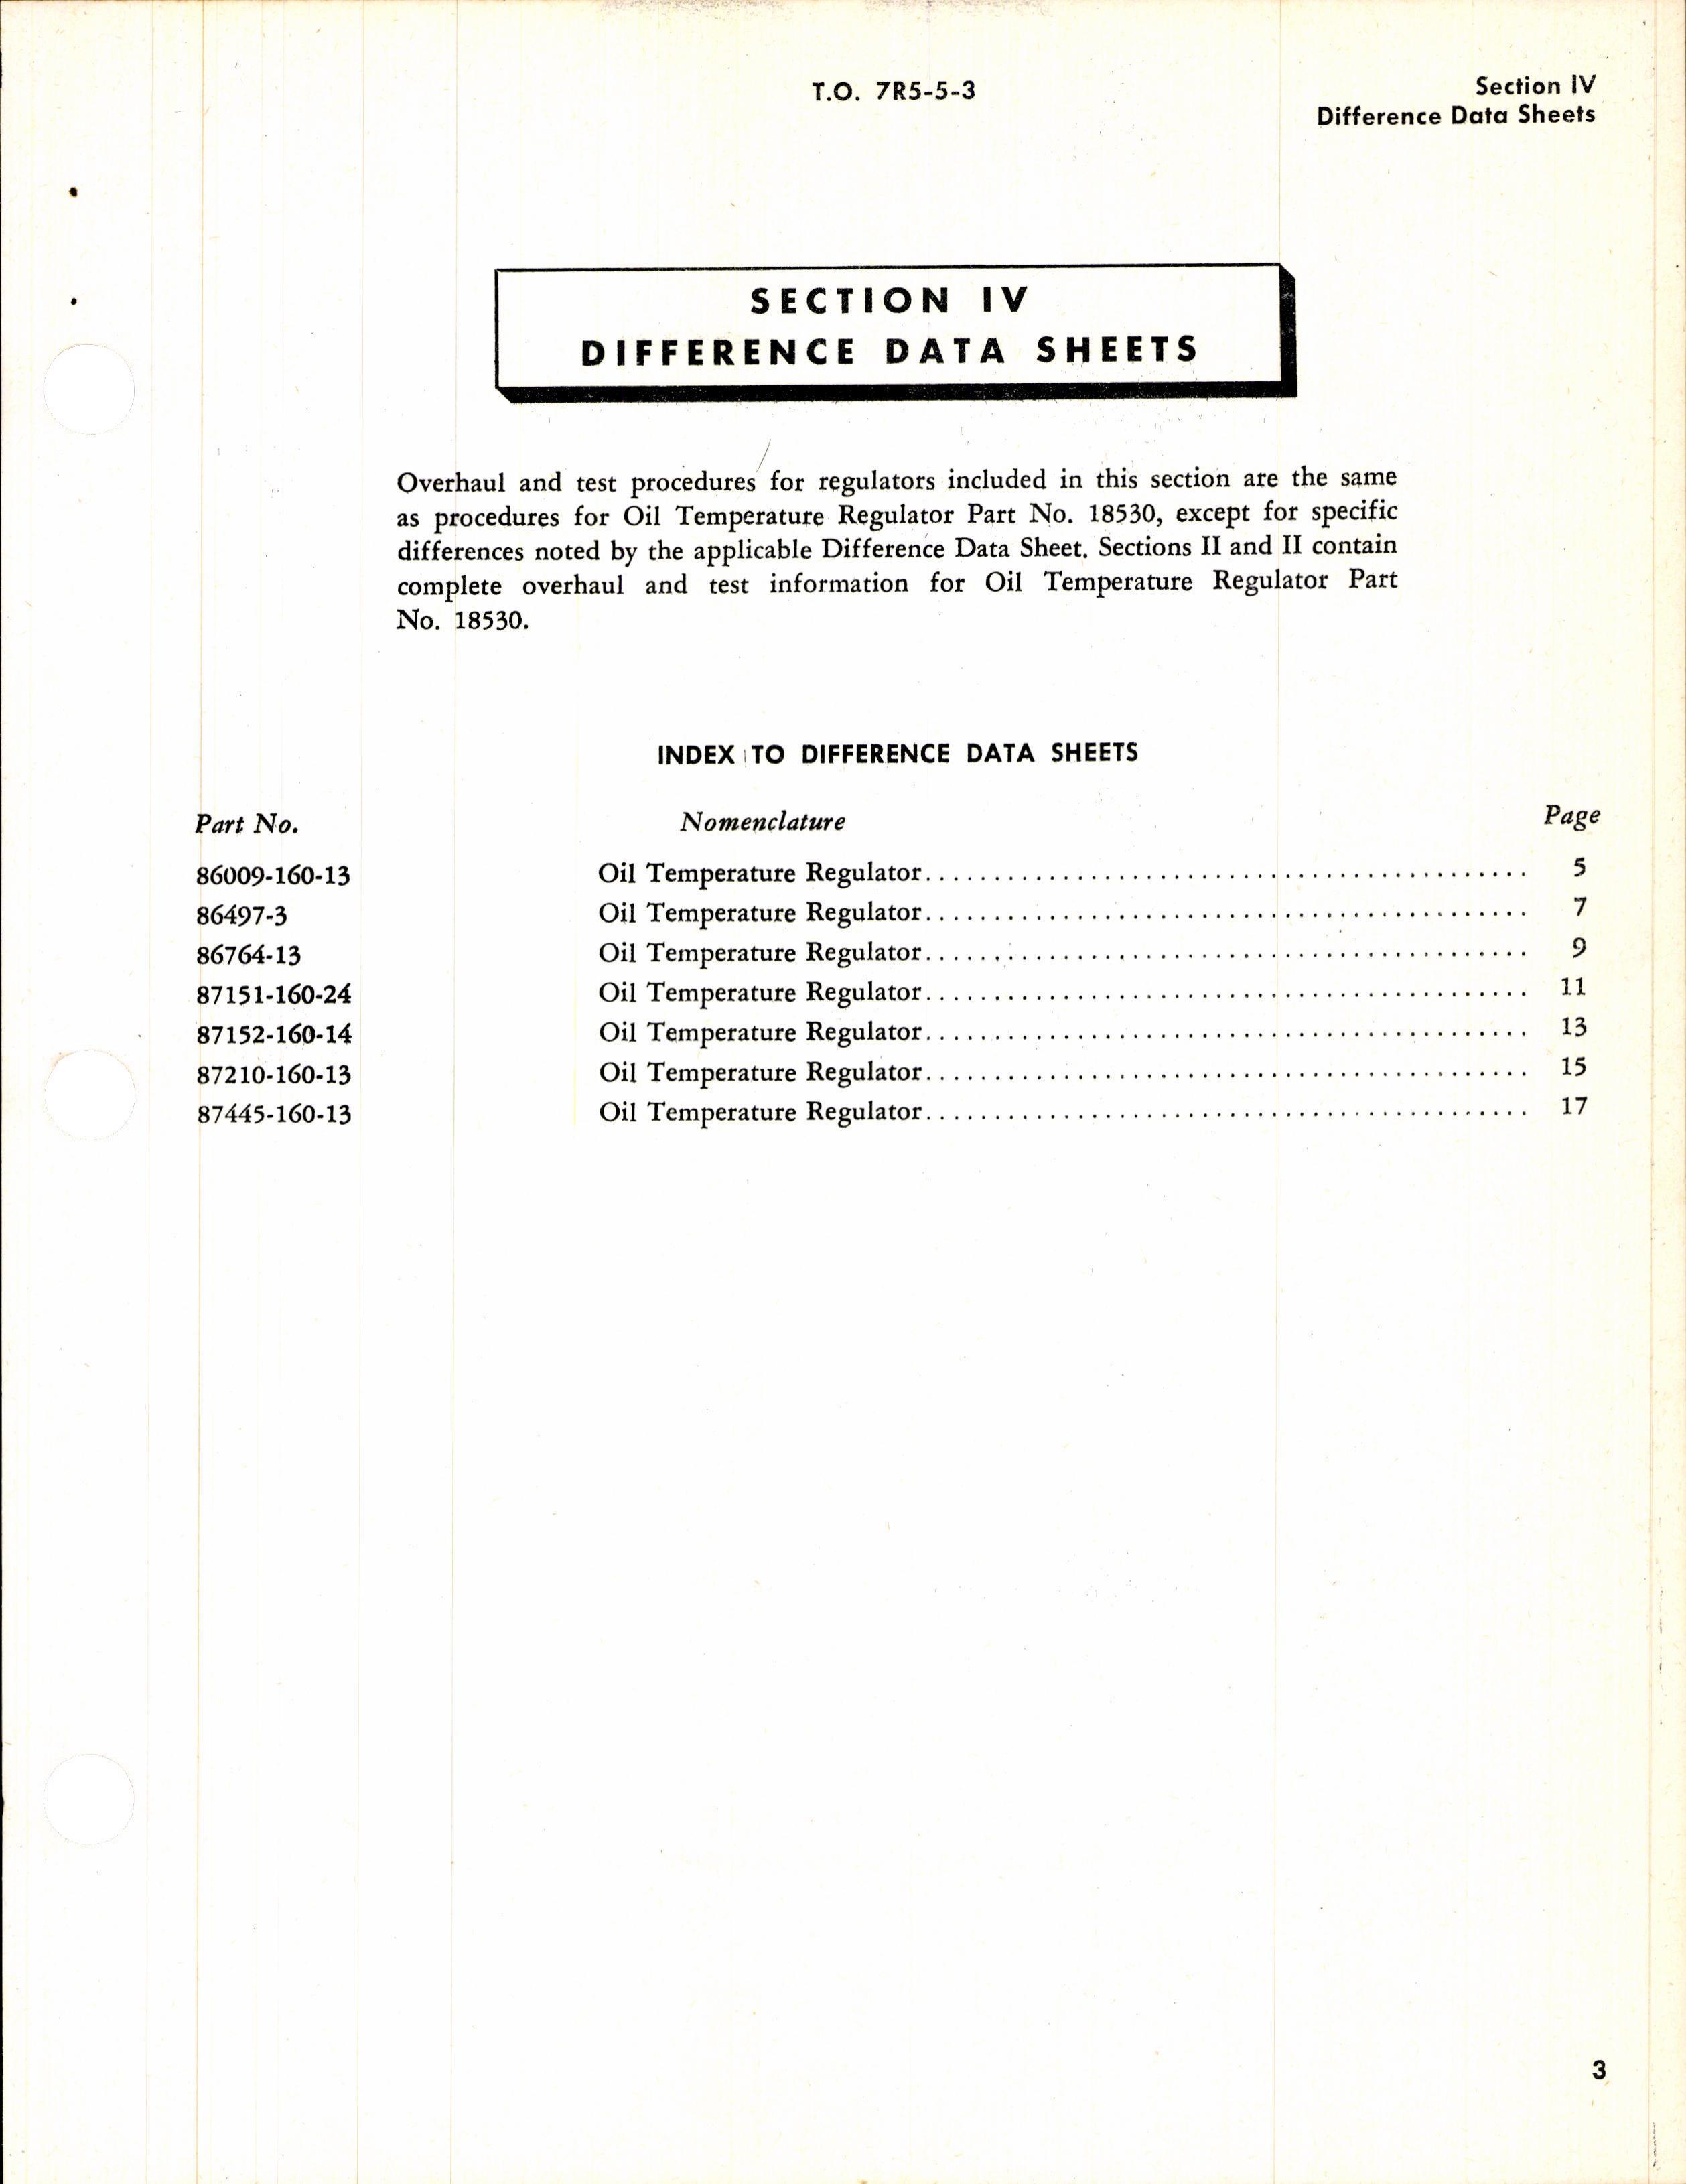 Sample page 5 from AirCorps Library document: Overhaul Instructions for Airesearch Oil Temperature Regulators 